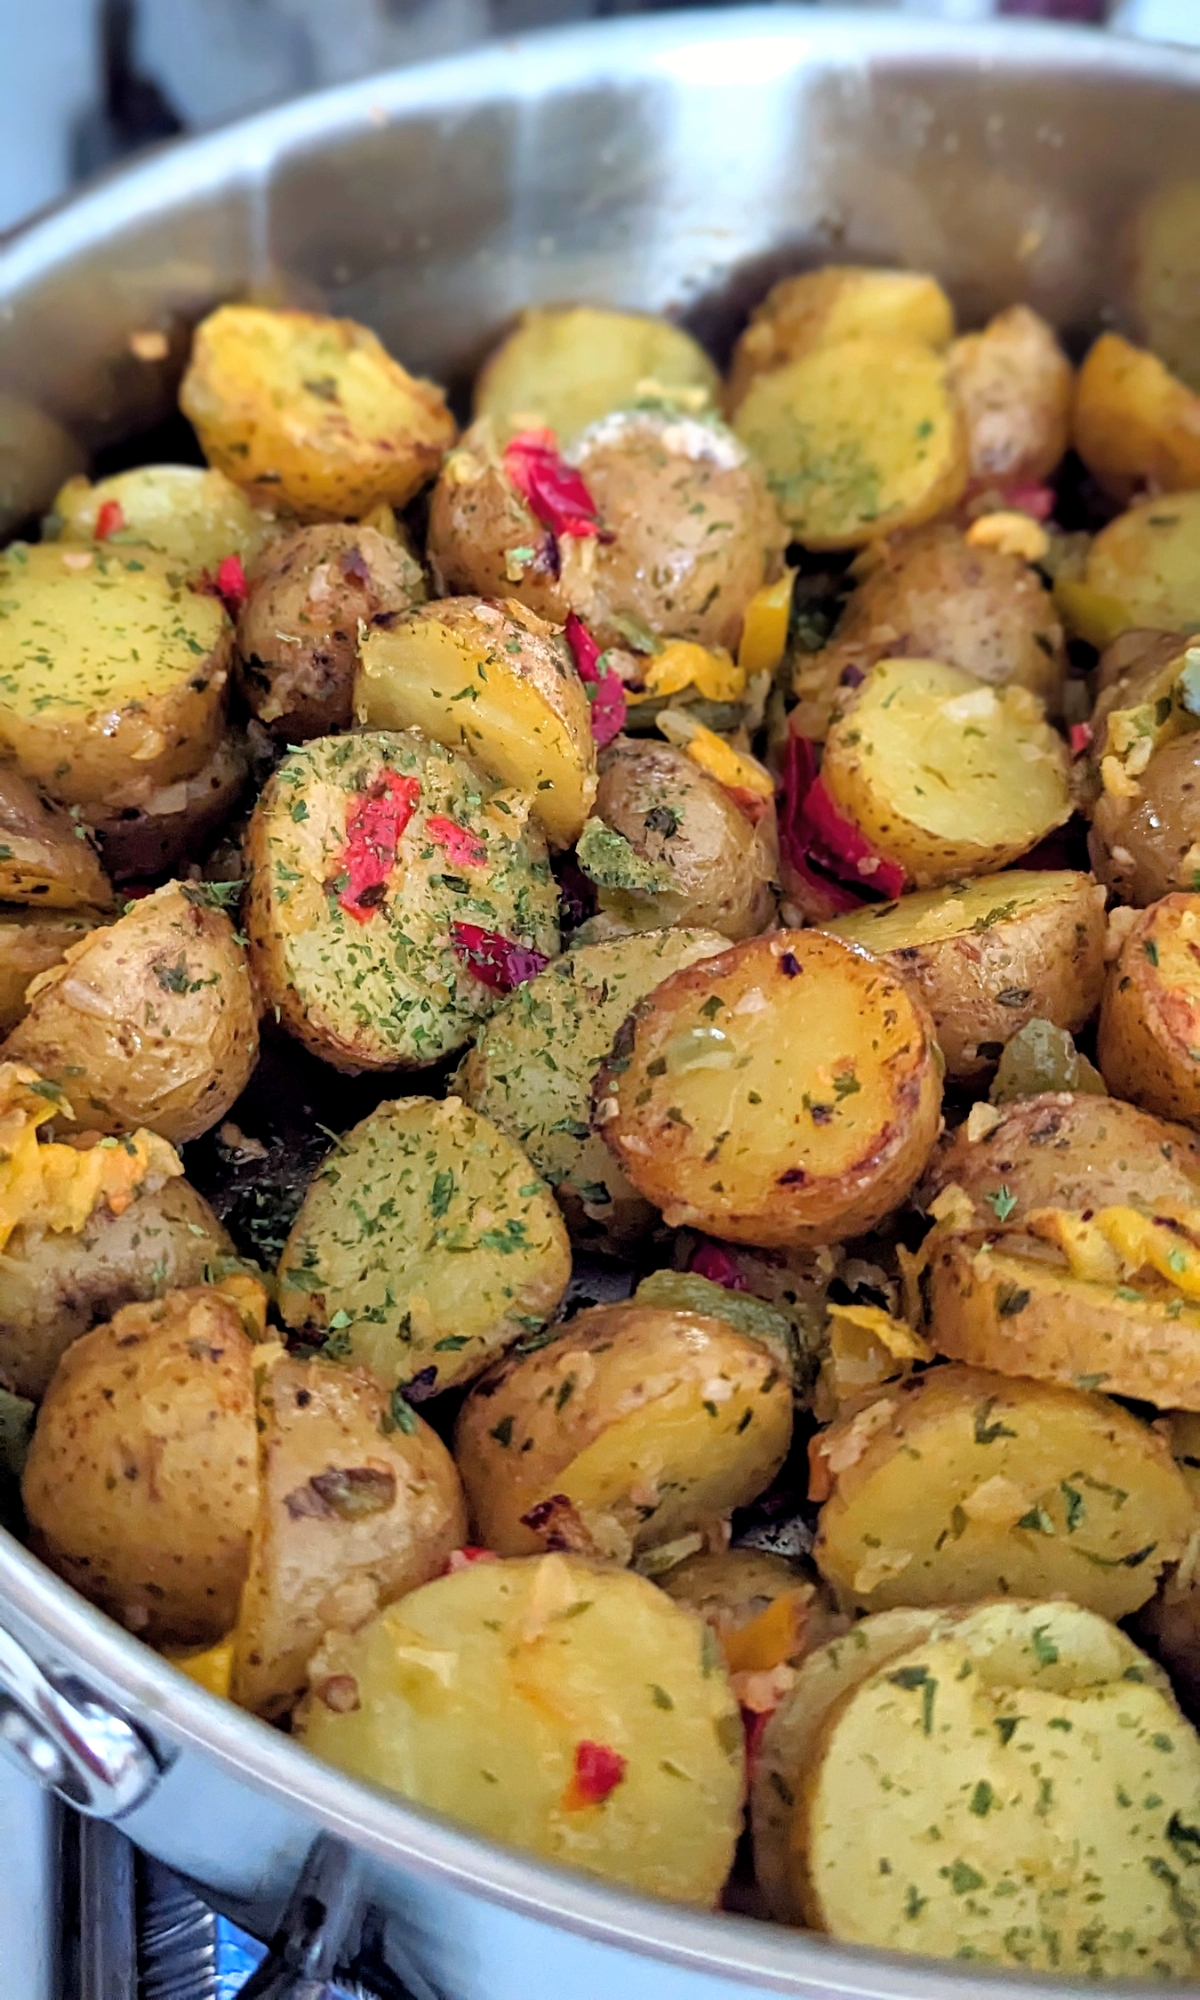 unsalted potatoes in a pan easy healthy potatoes o'brien no salt added potato recipes